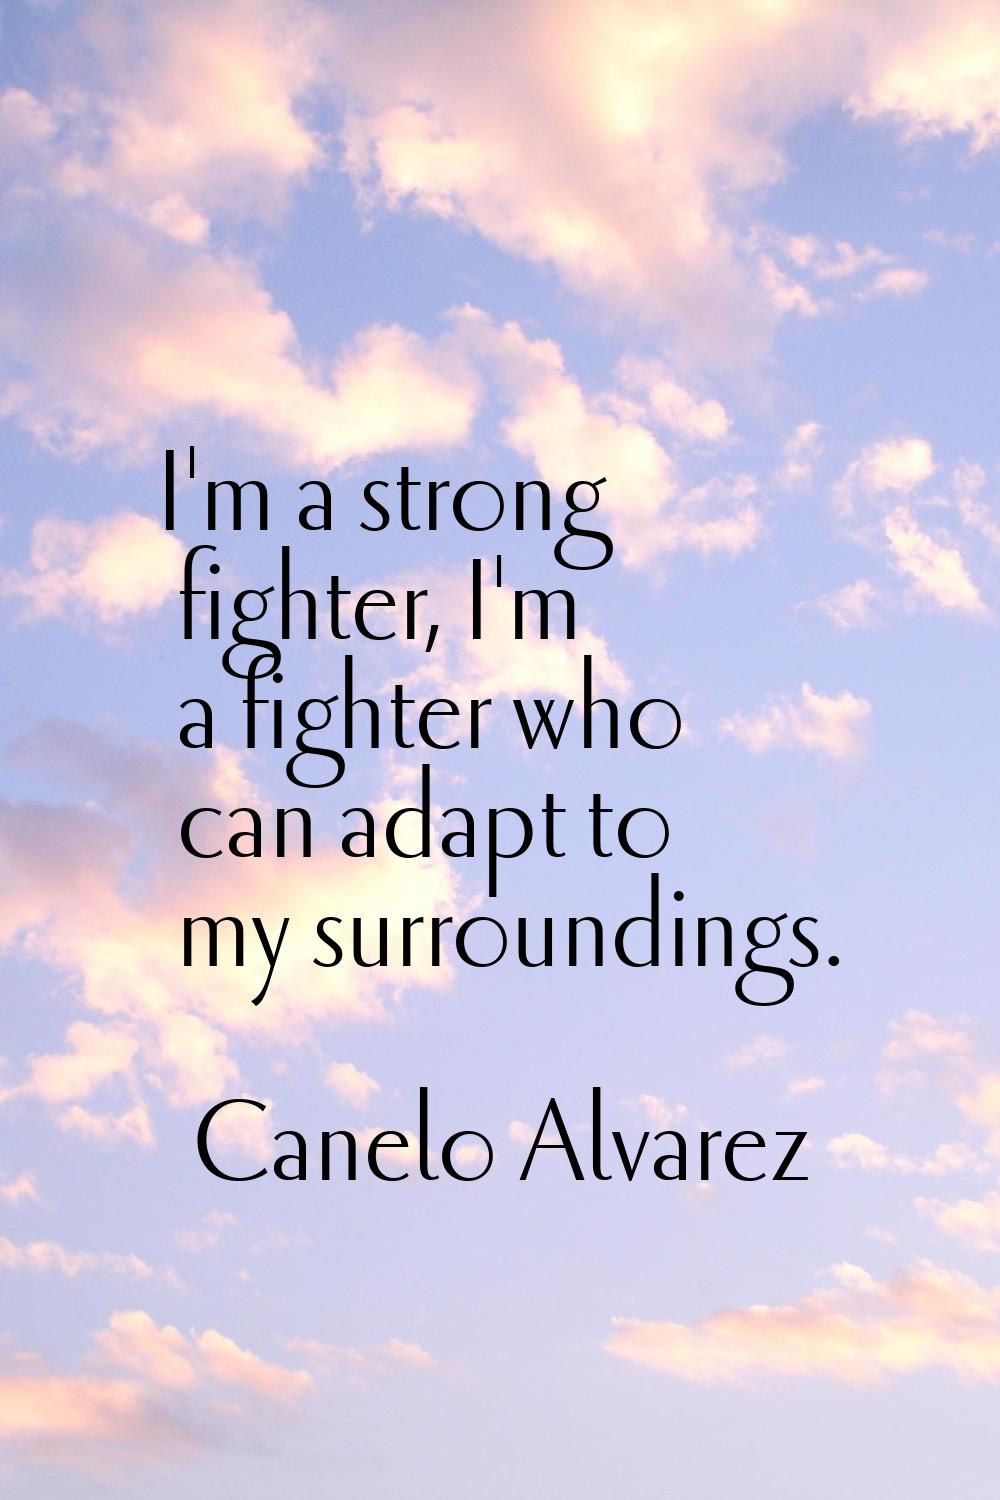 I'm a strong fighter, I'm a fighter who can adapt to my surroundings.